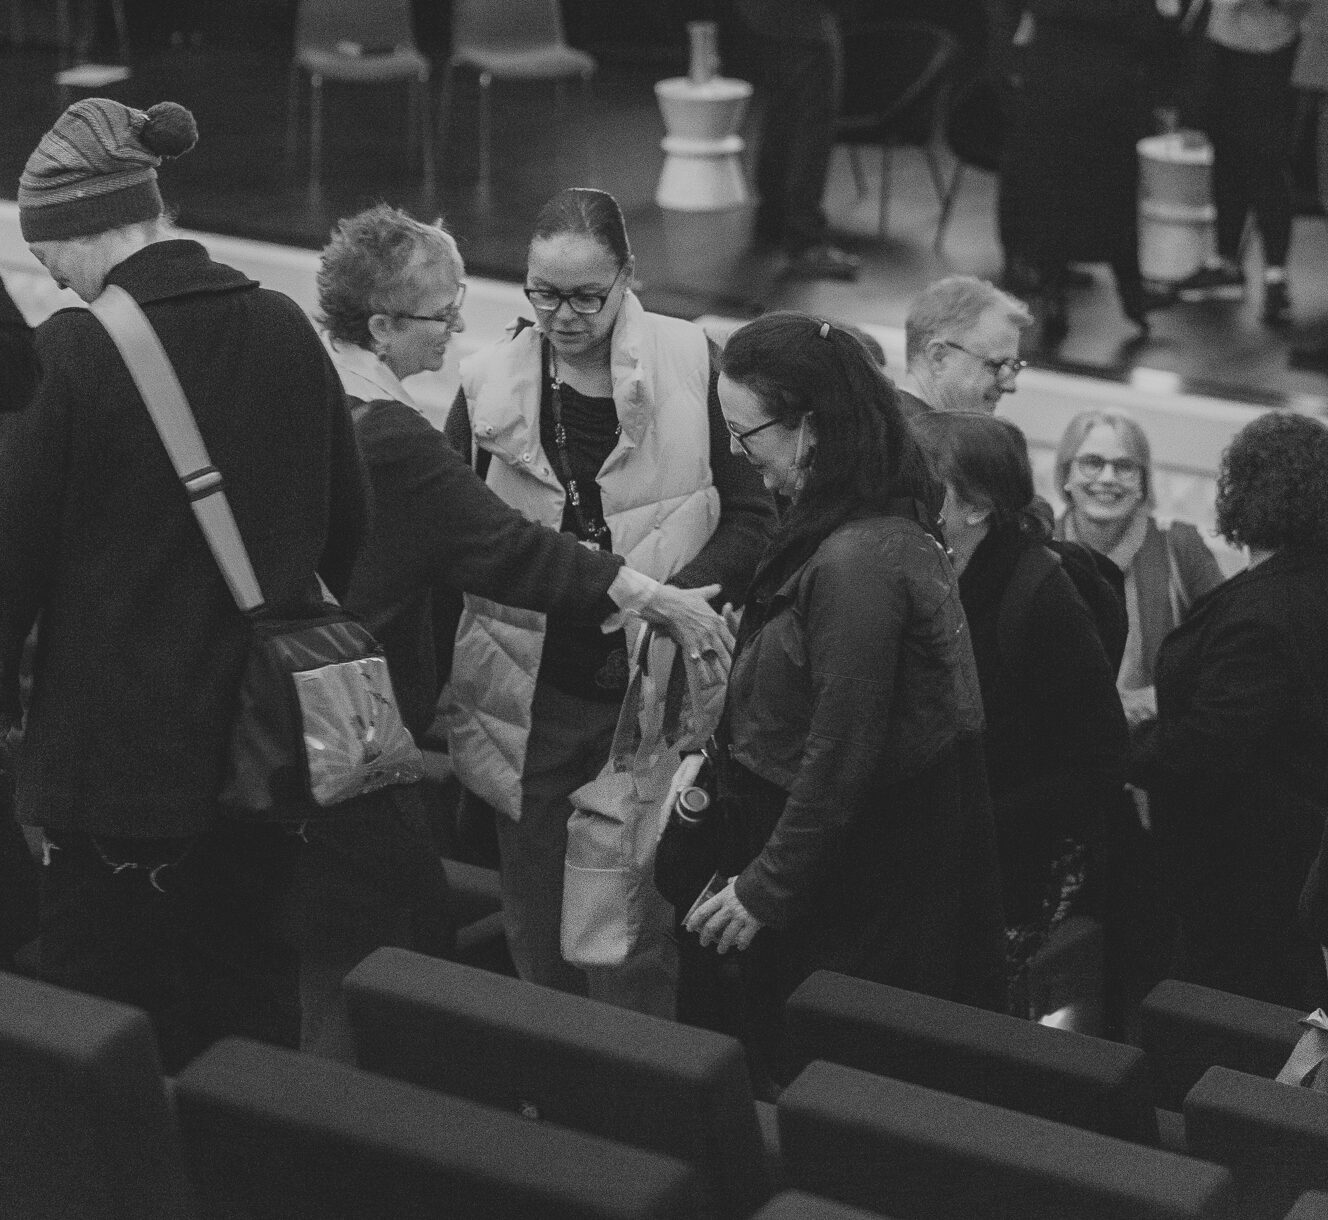 A crowd of people chats after the event.